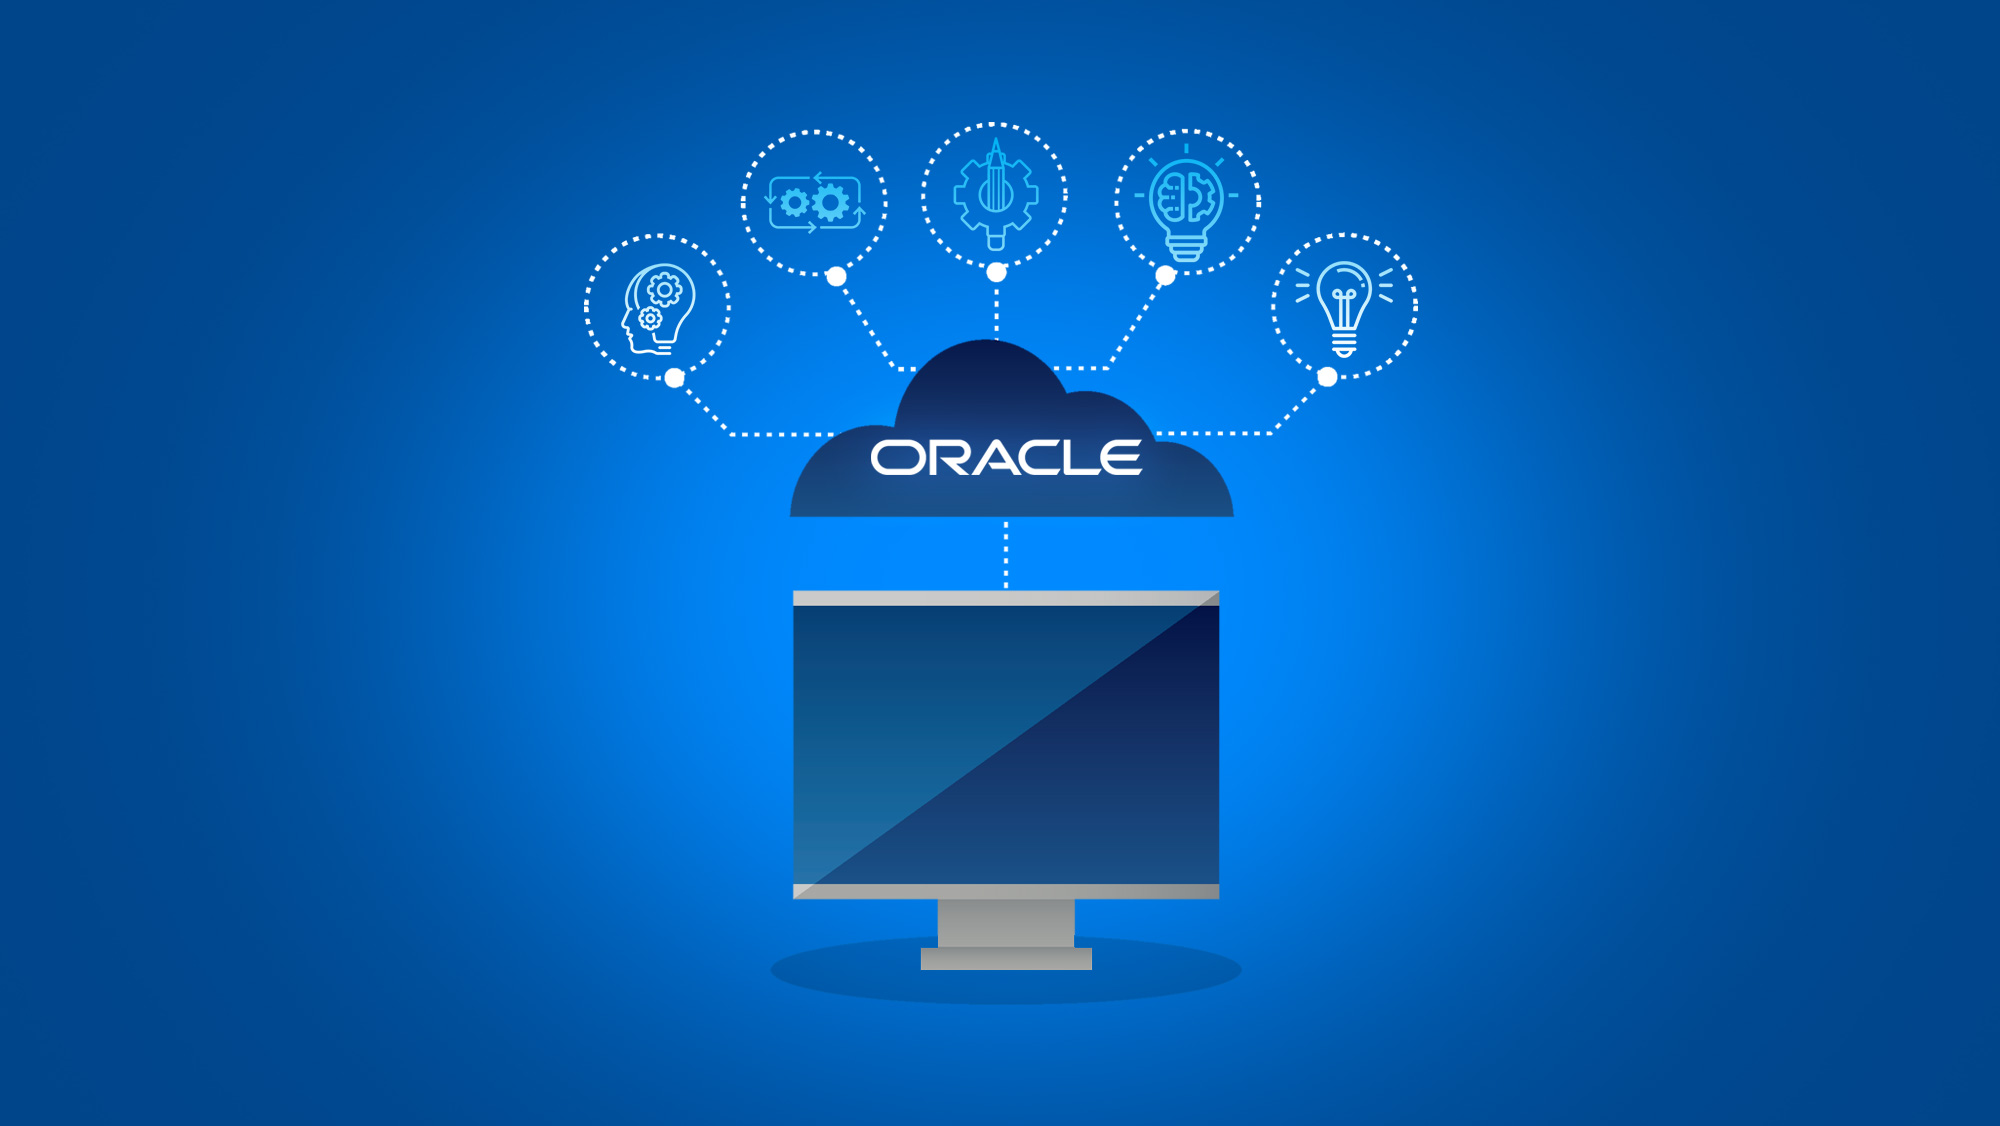 Unleashing-the-power-of-Oracle-cloud-Top-5-benefits-for-your-success